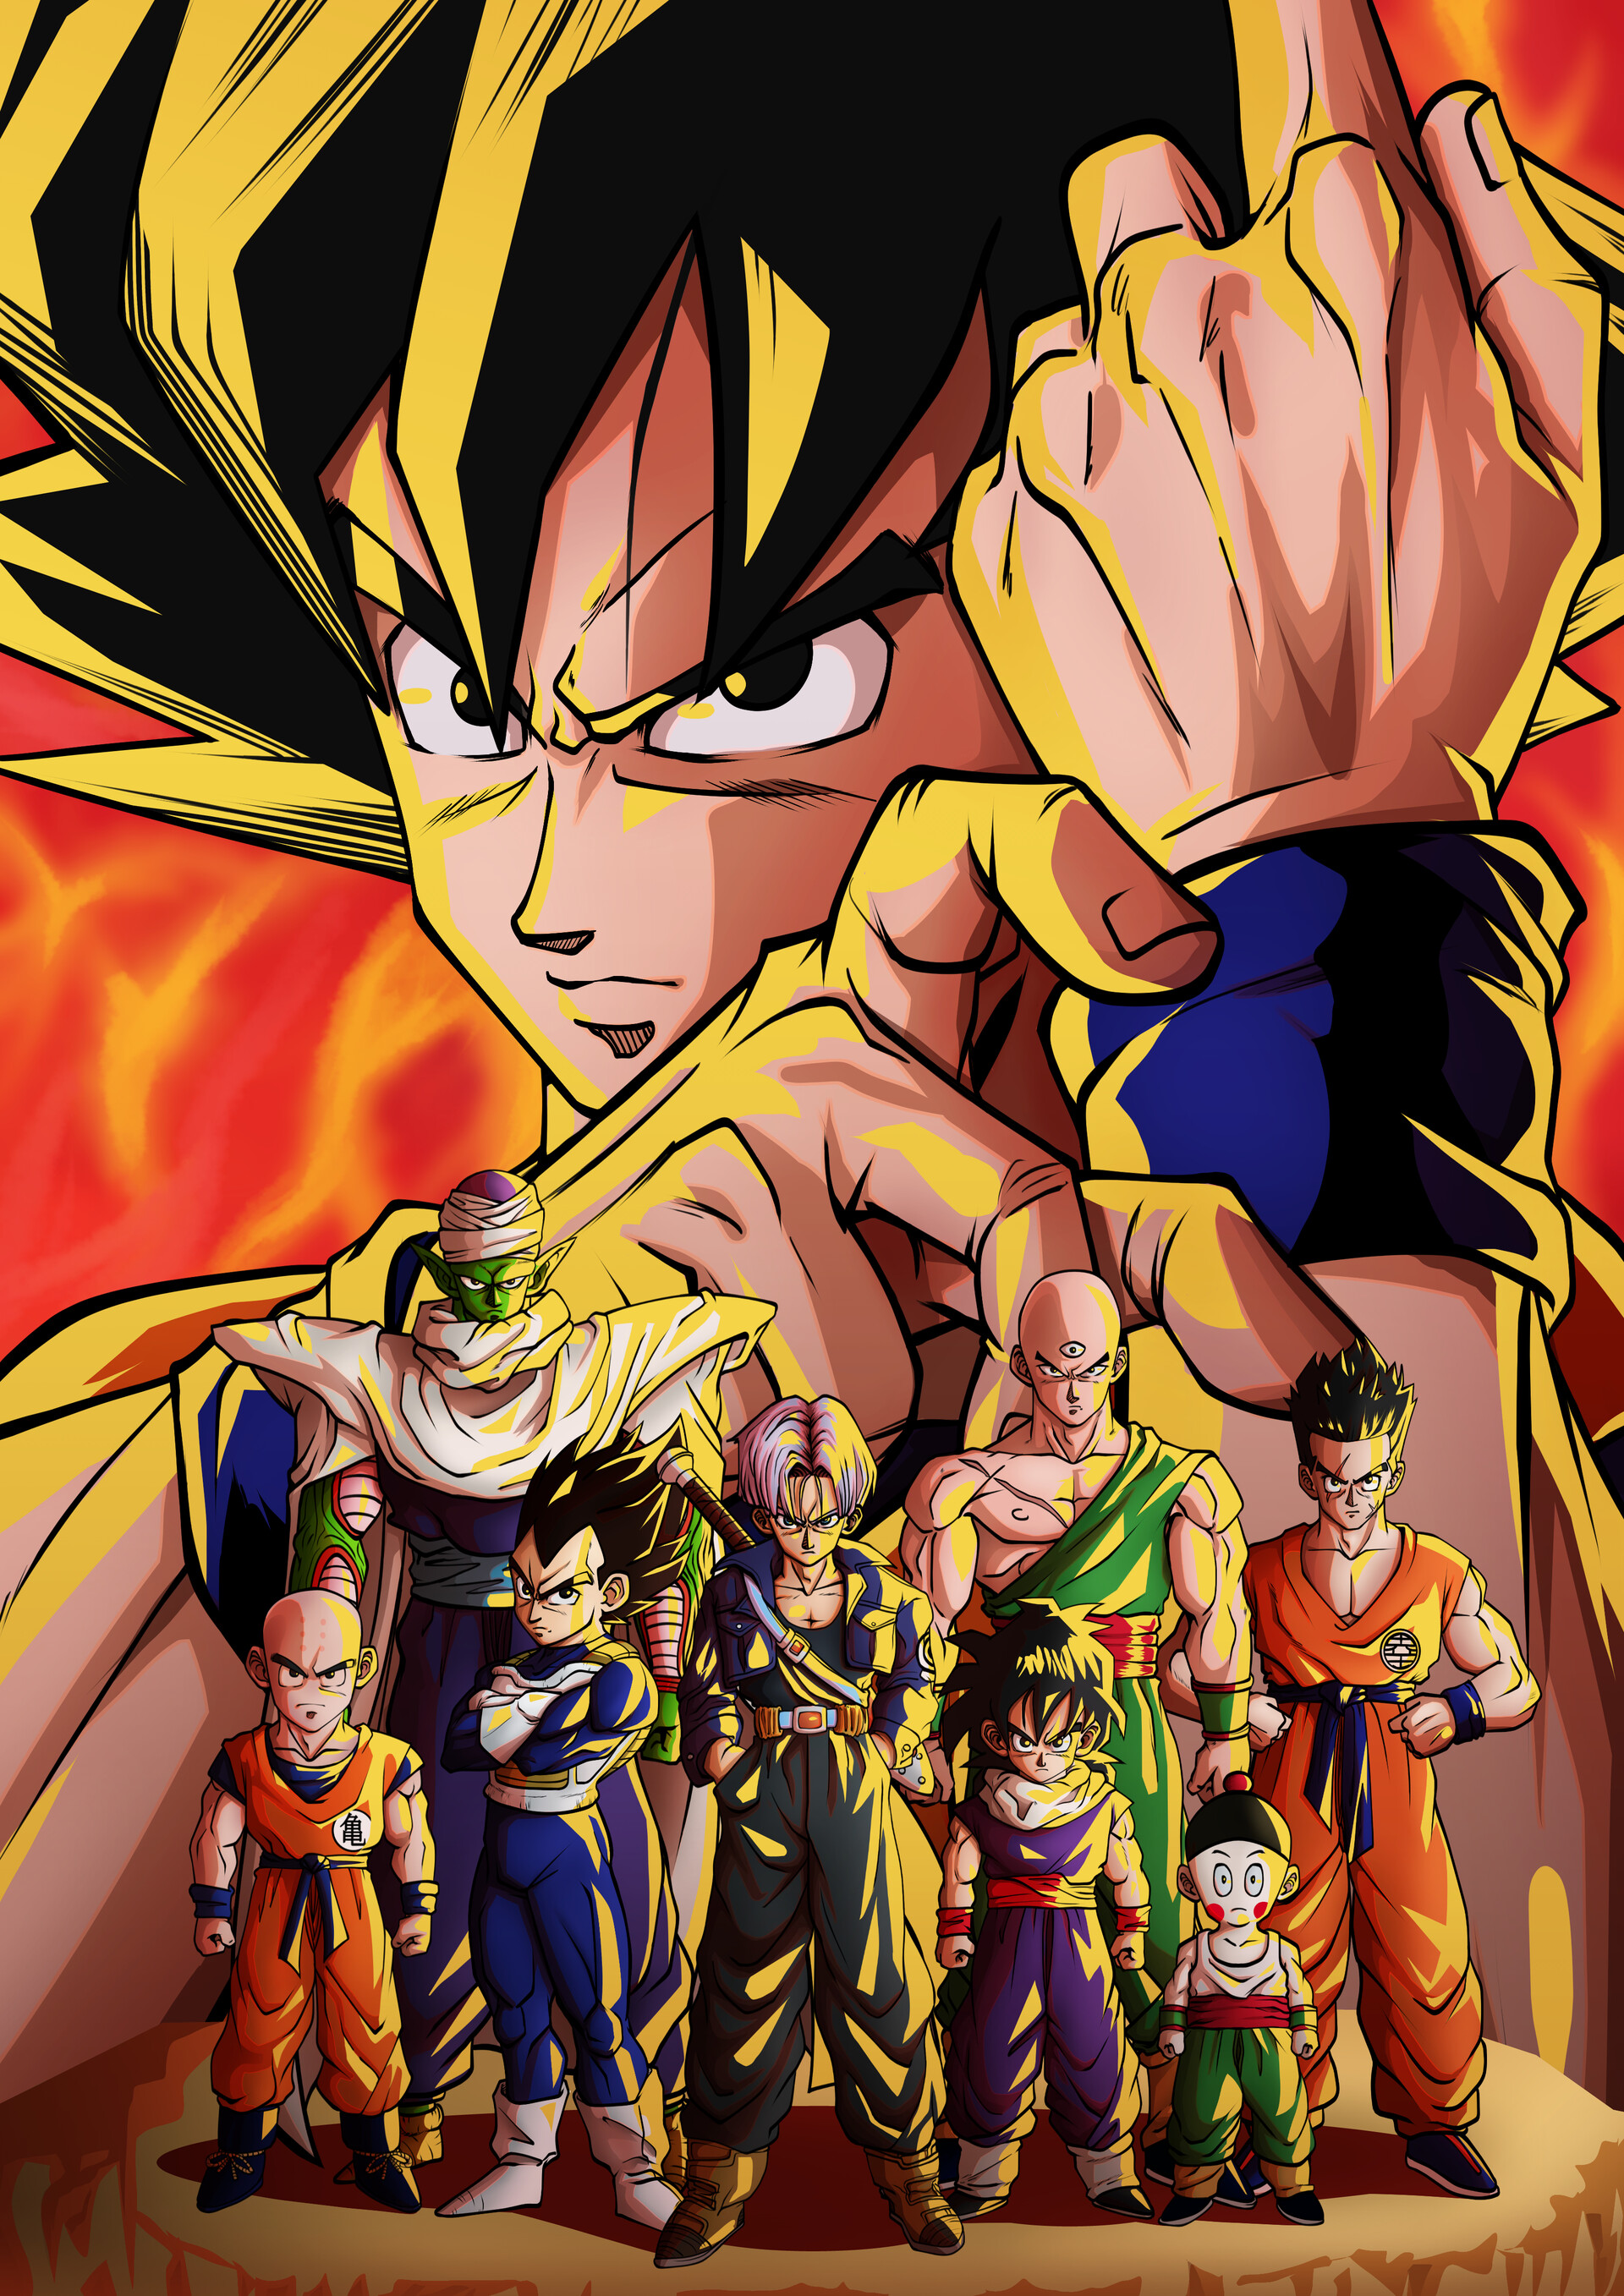 Dragonball Android Saga Posters for Sale